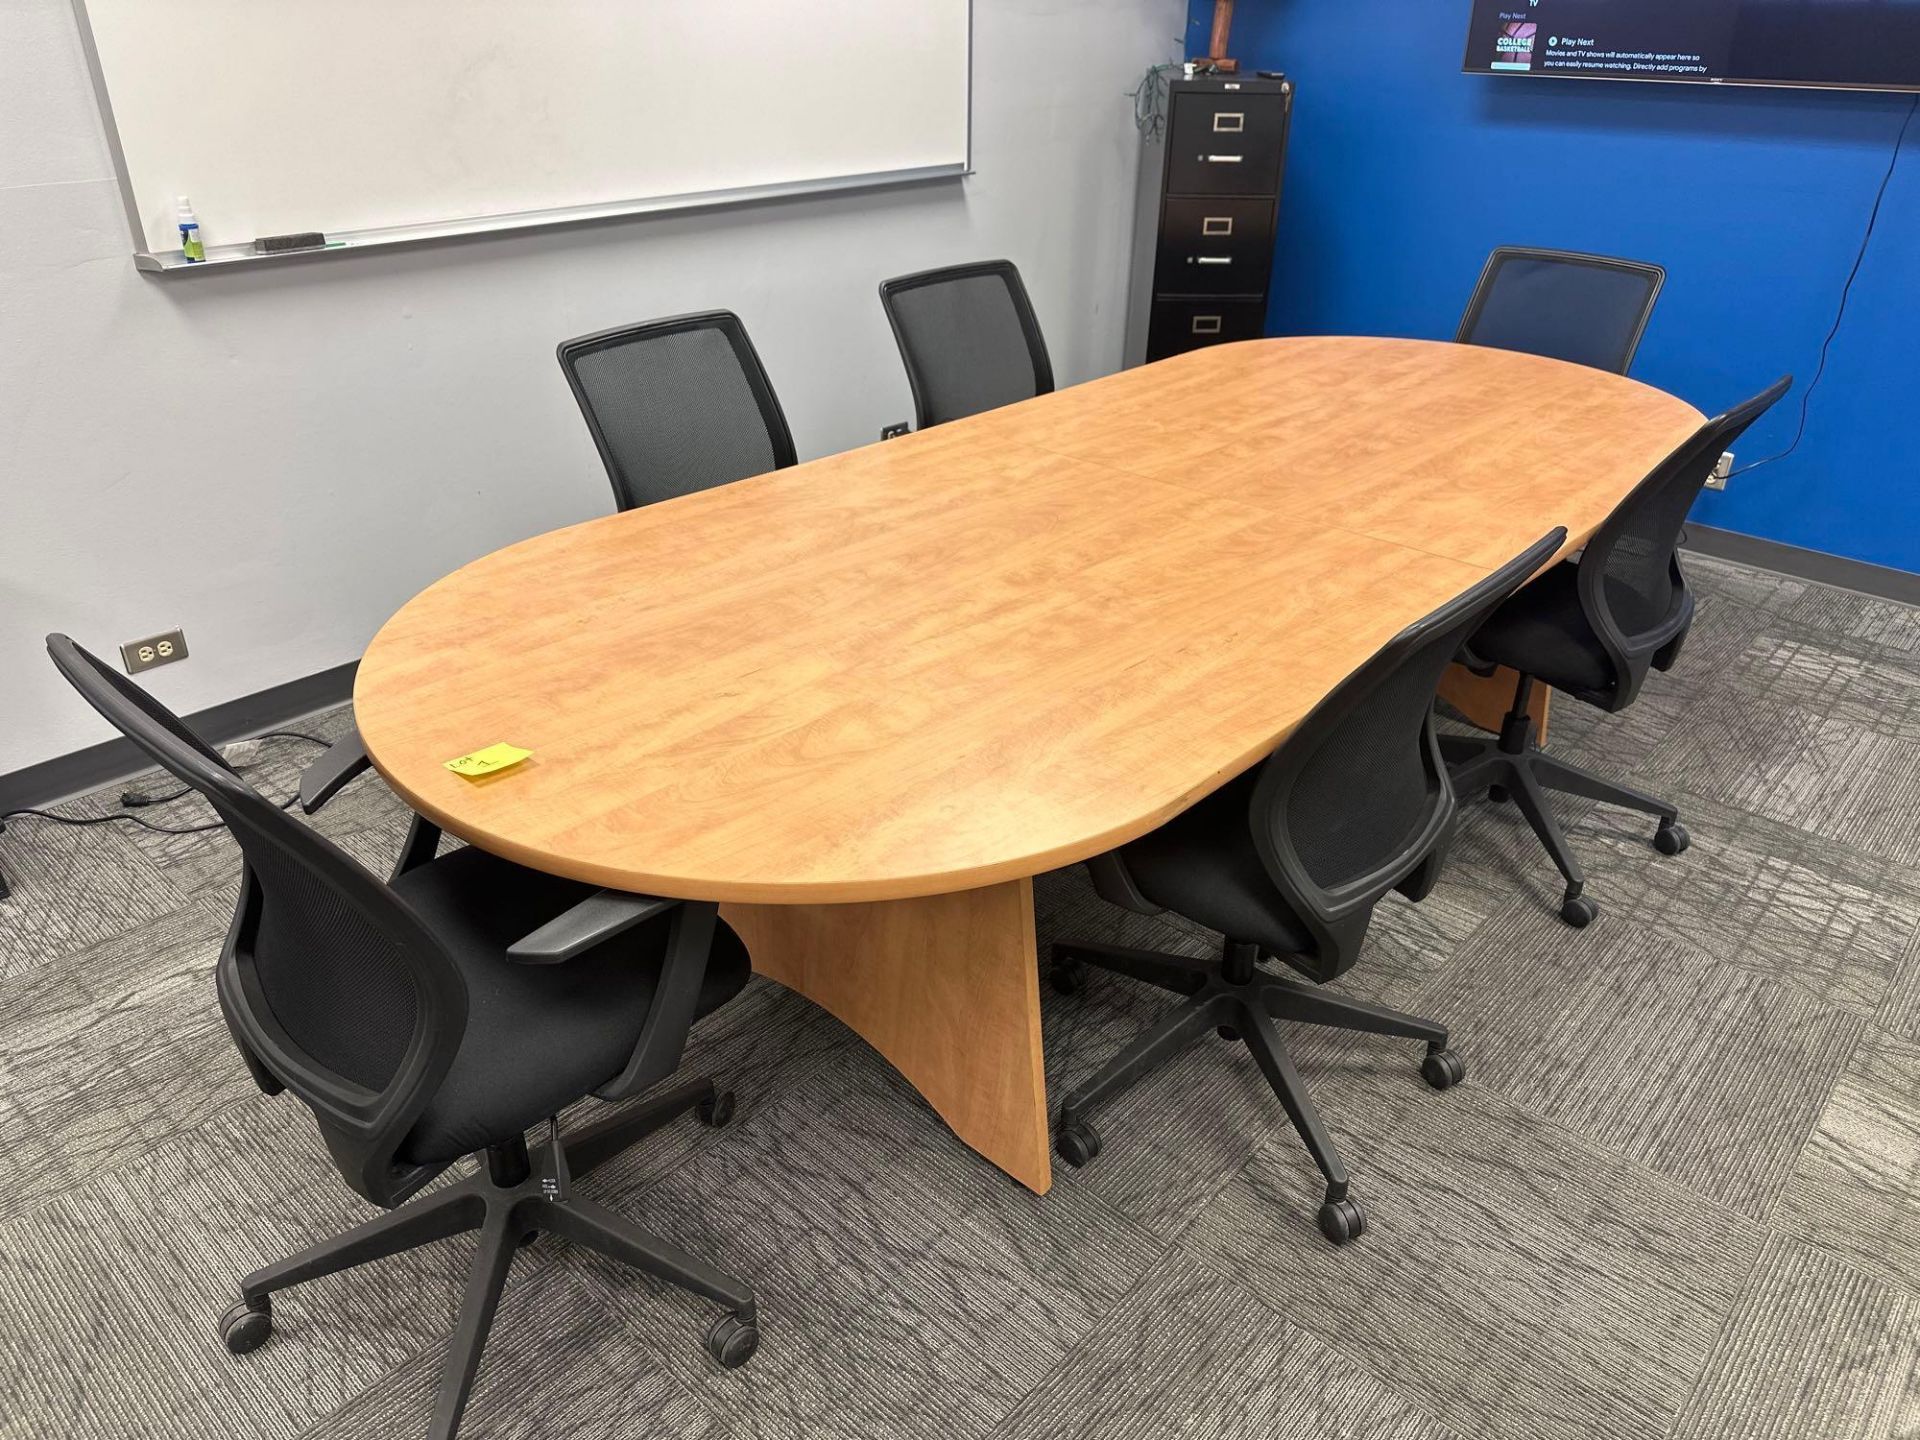 CONFERENCE ROOM TABLE WITH 6 ROLLING CHAIRS